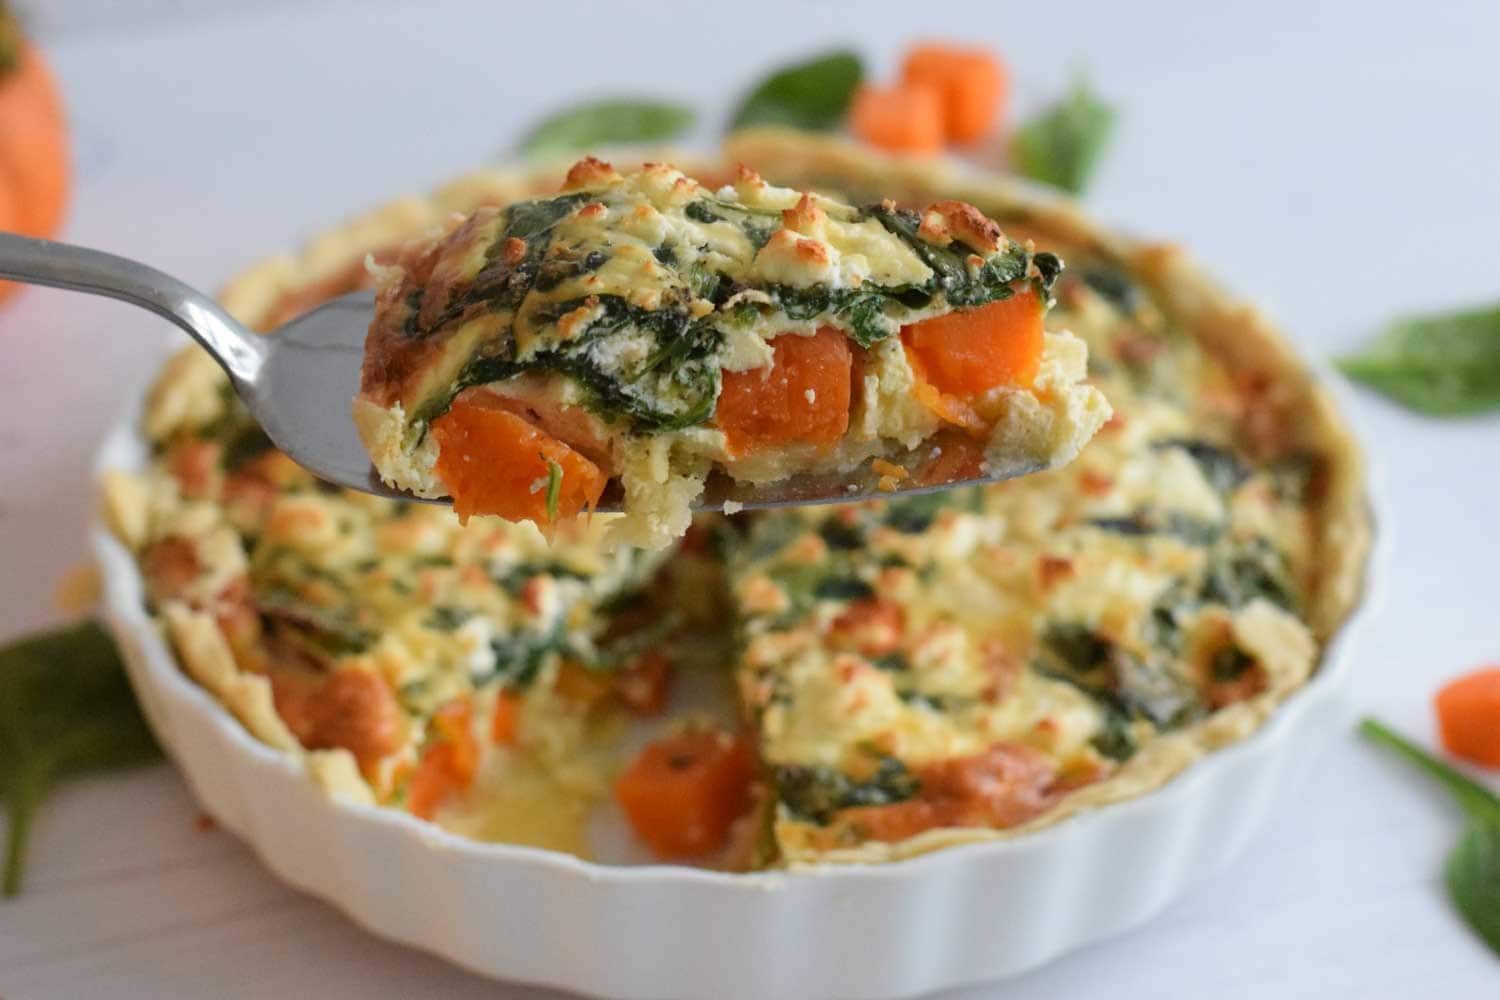 Low FODMAP pumpkin quiche with spinach and feta